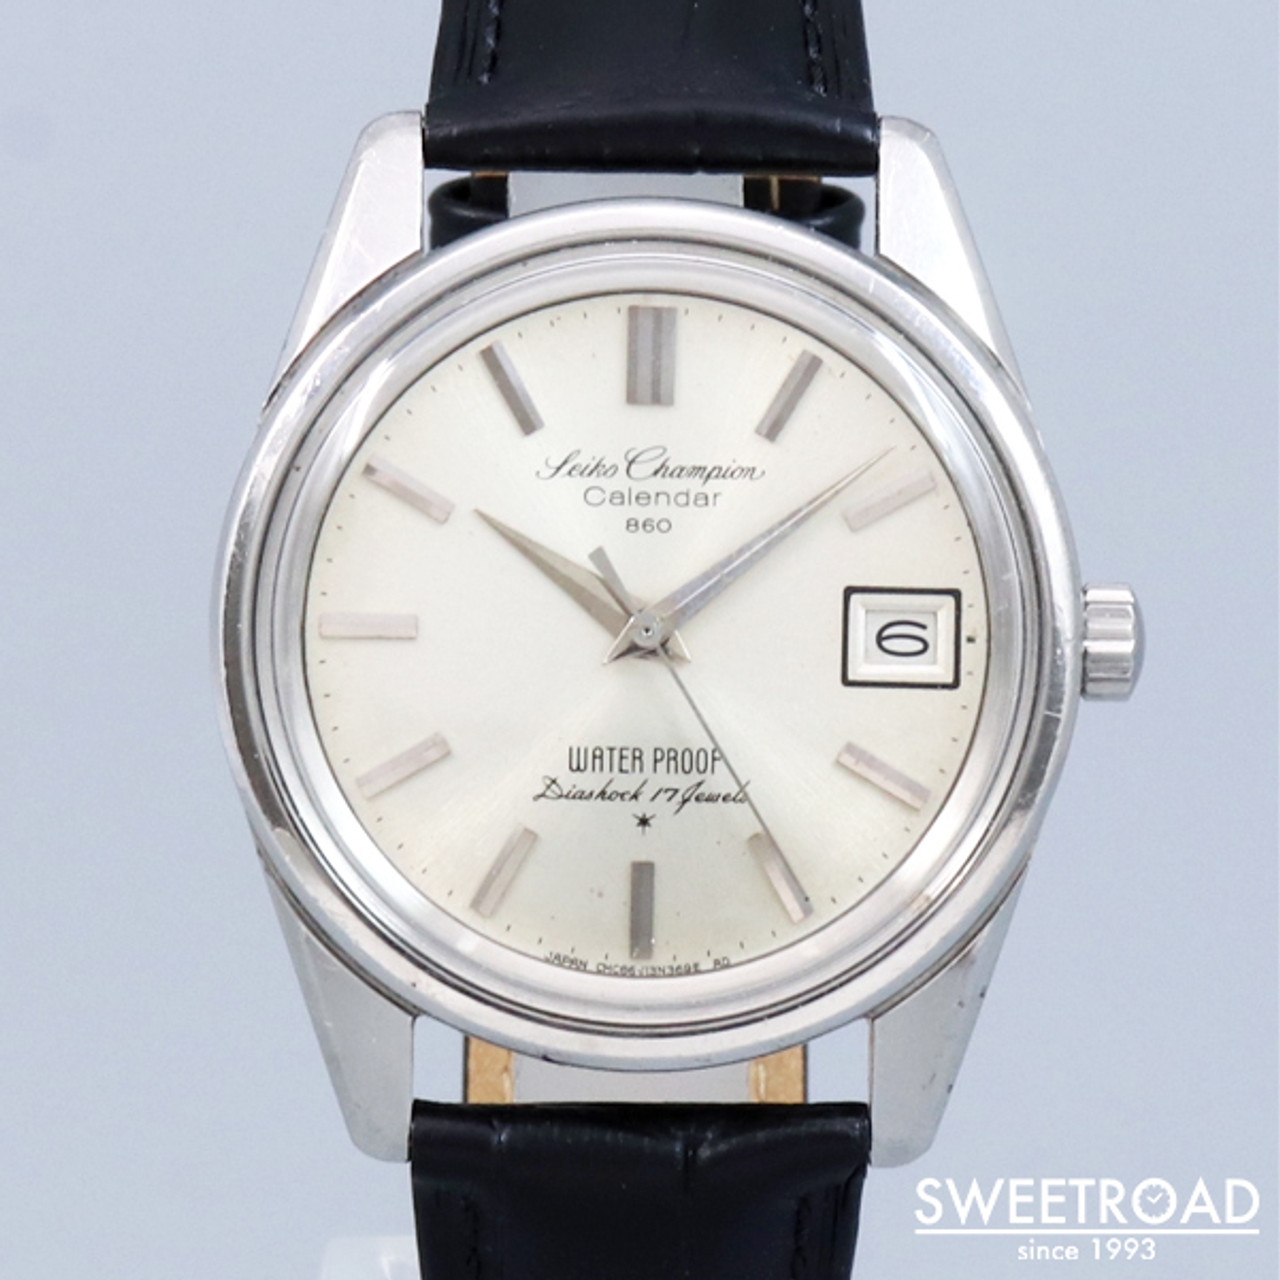 Seiko 86898 Vintage Used Champion Calendar 860 SS Manual Winding Mens Watch  - Japan Pre-owned Vintage